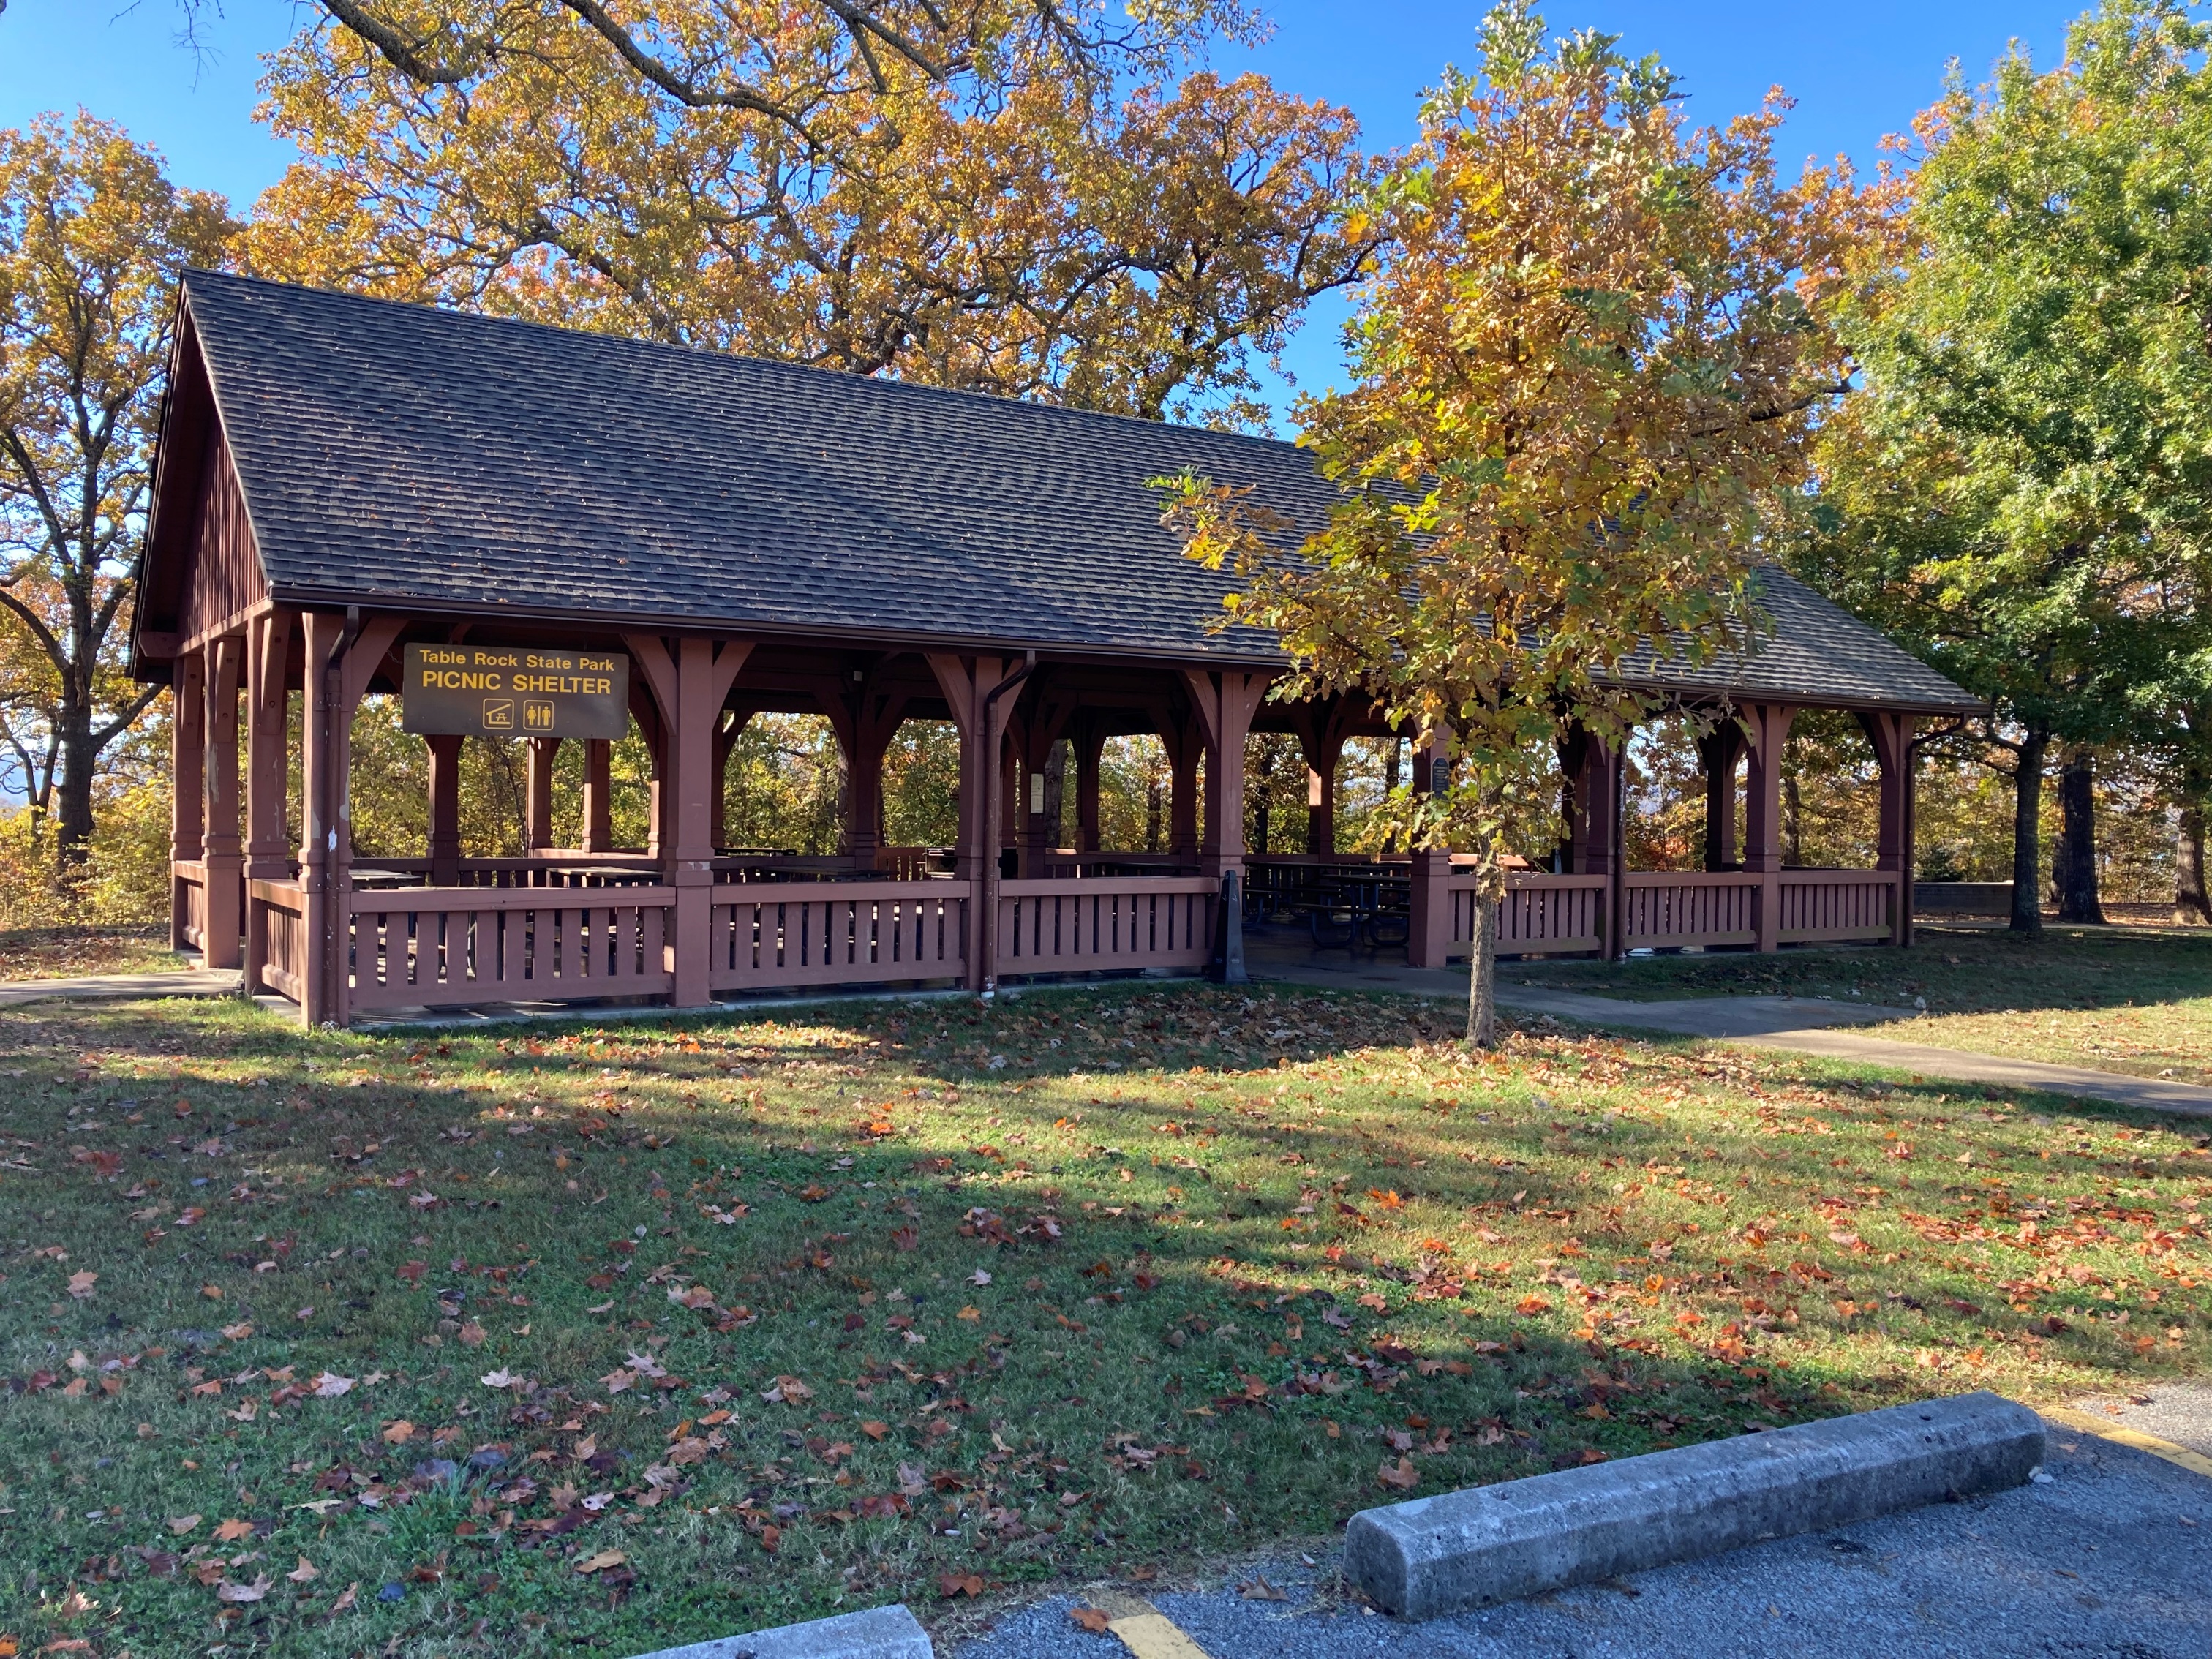 Open picnic shelter and sign